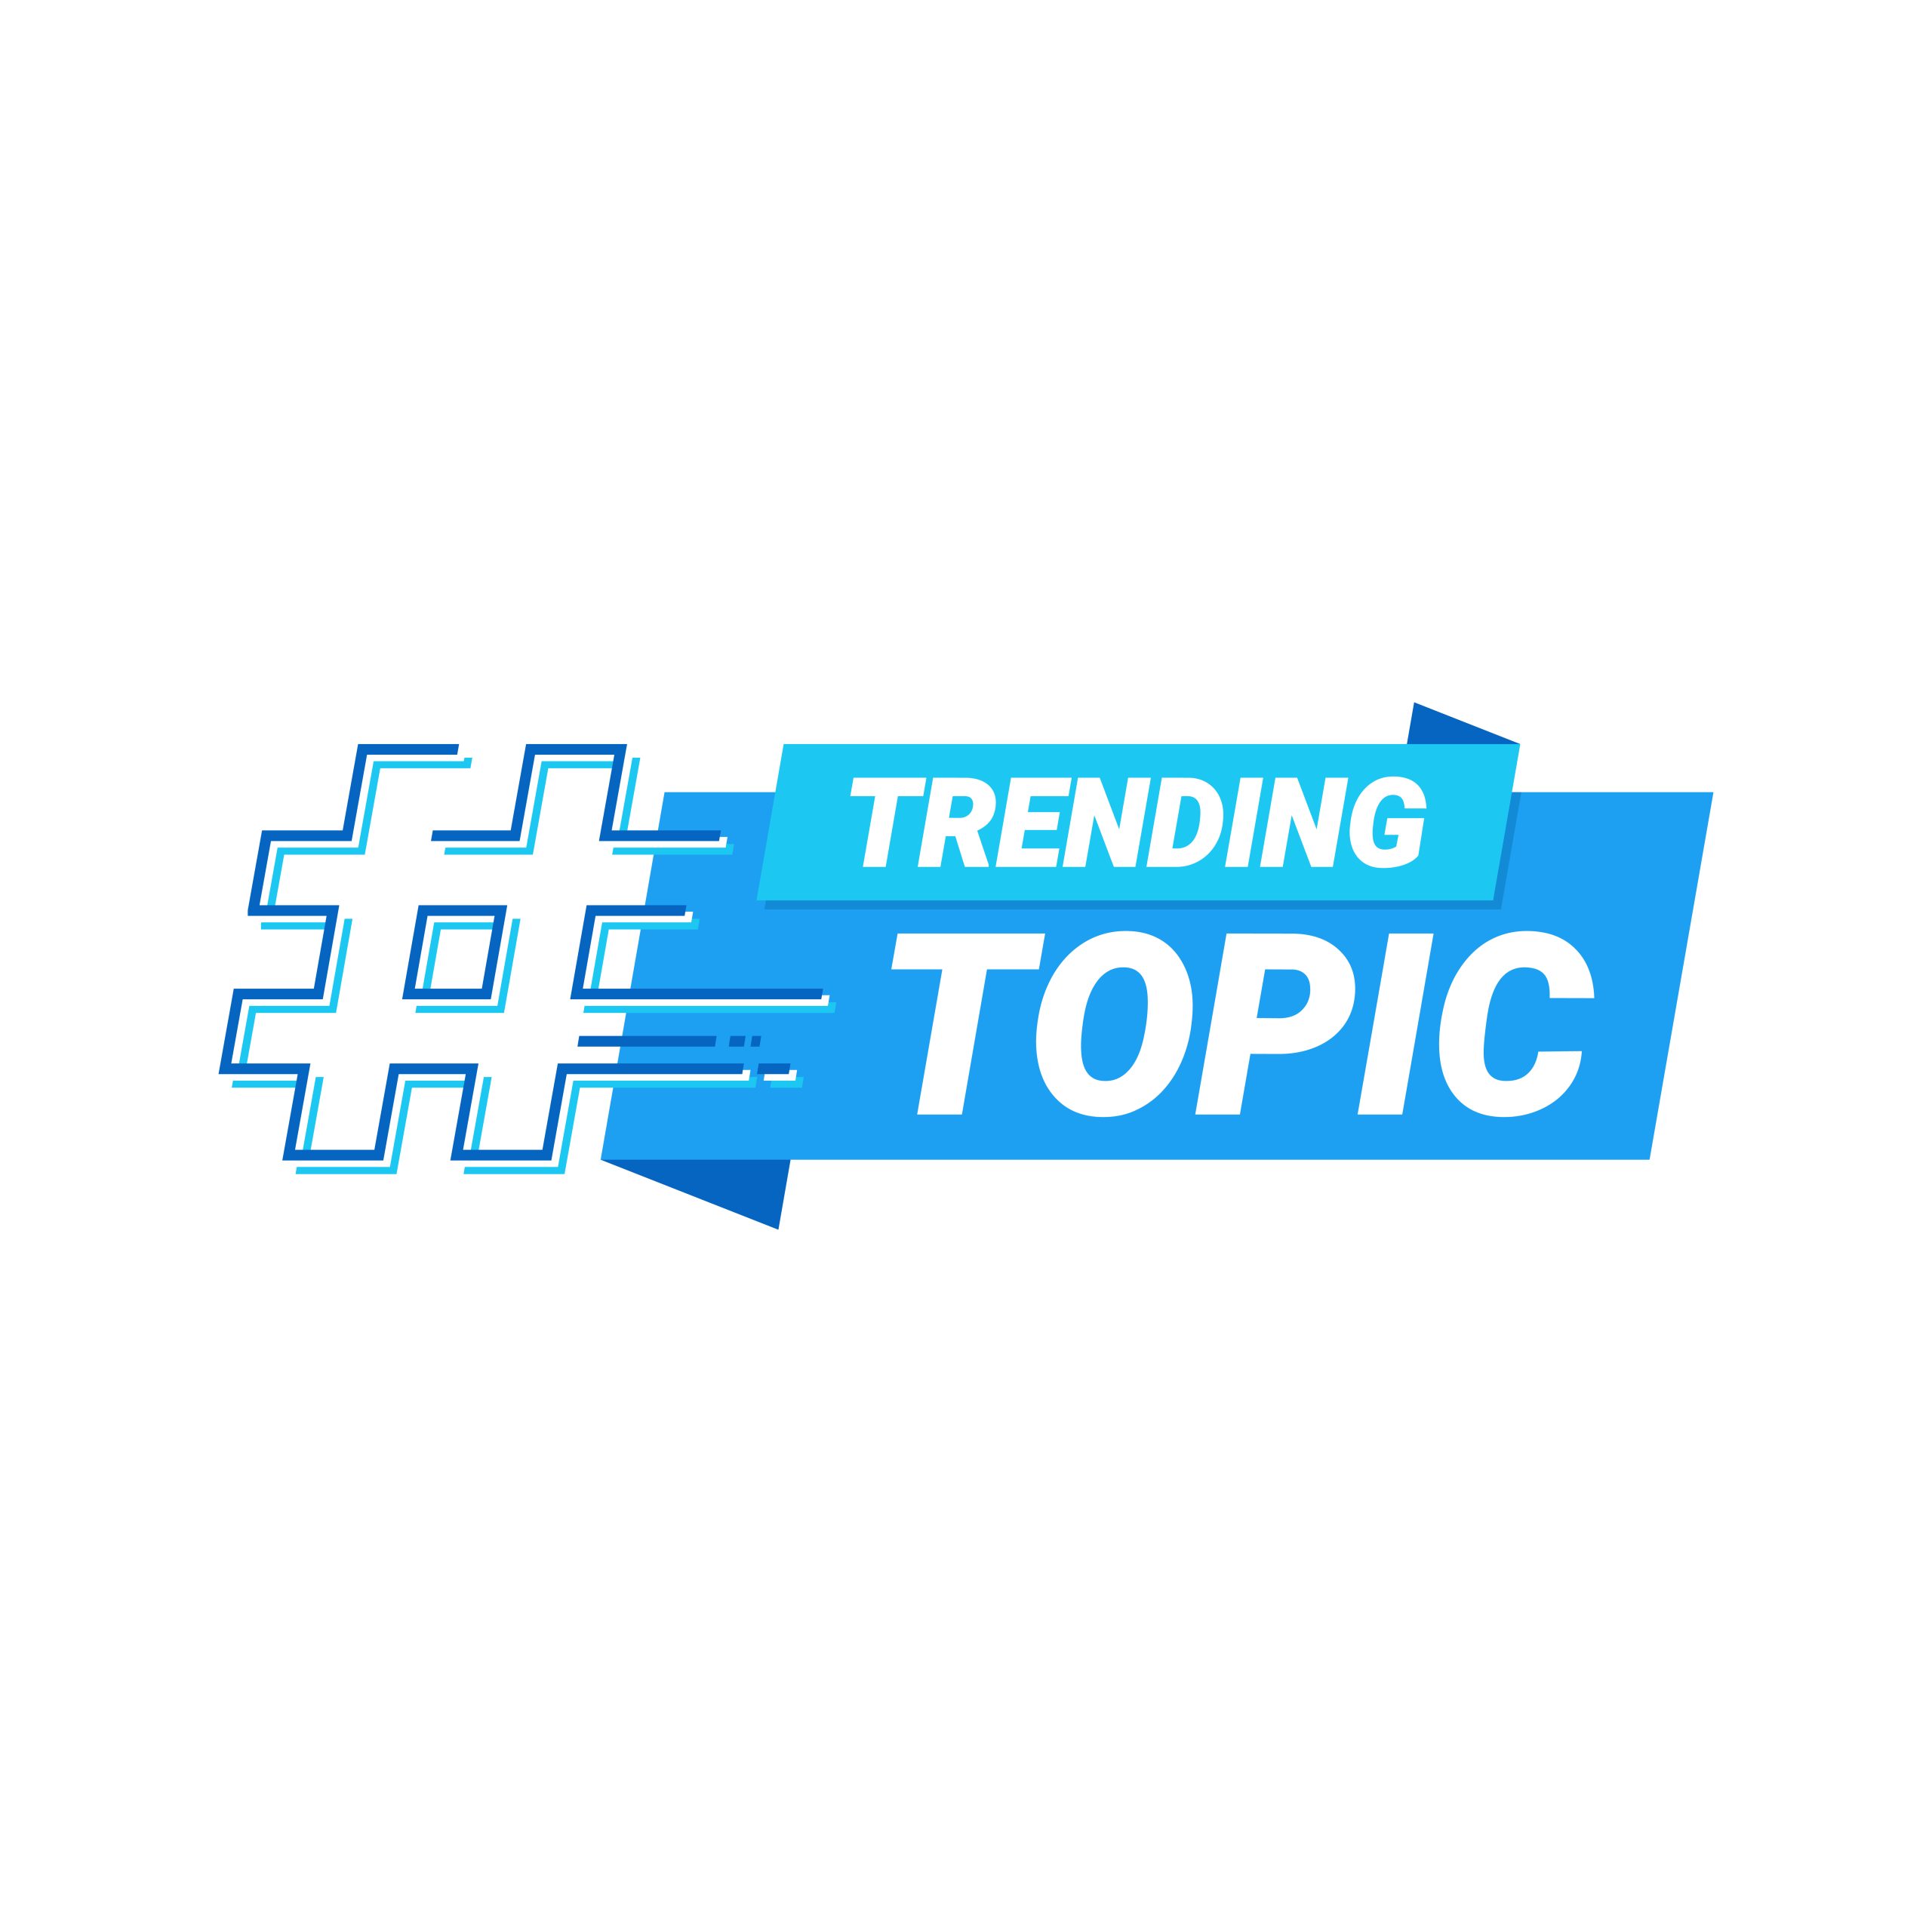 Blue outline of a hashtag on a white background, next to the words 'TRENDING' and 'TOPIC' on their own separate blue banners